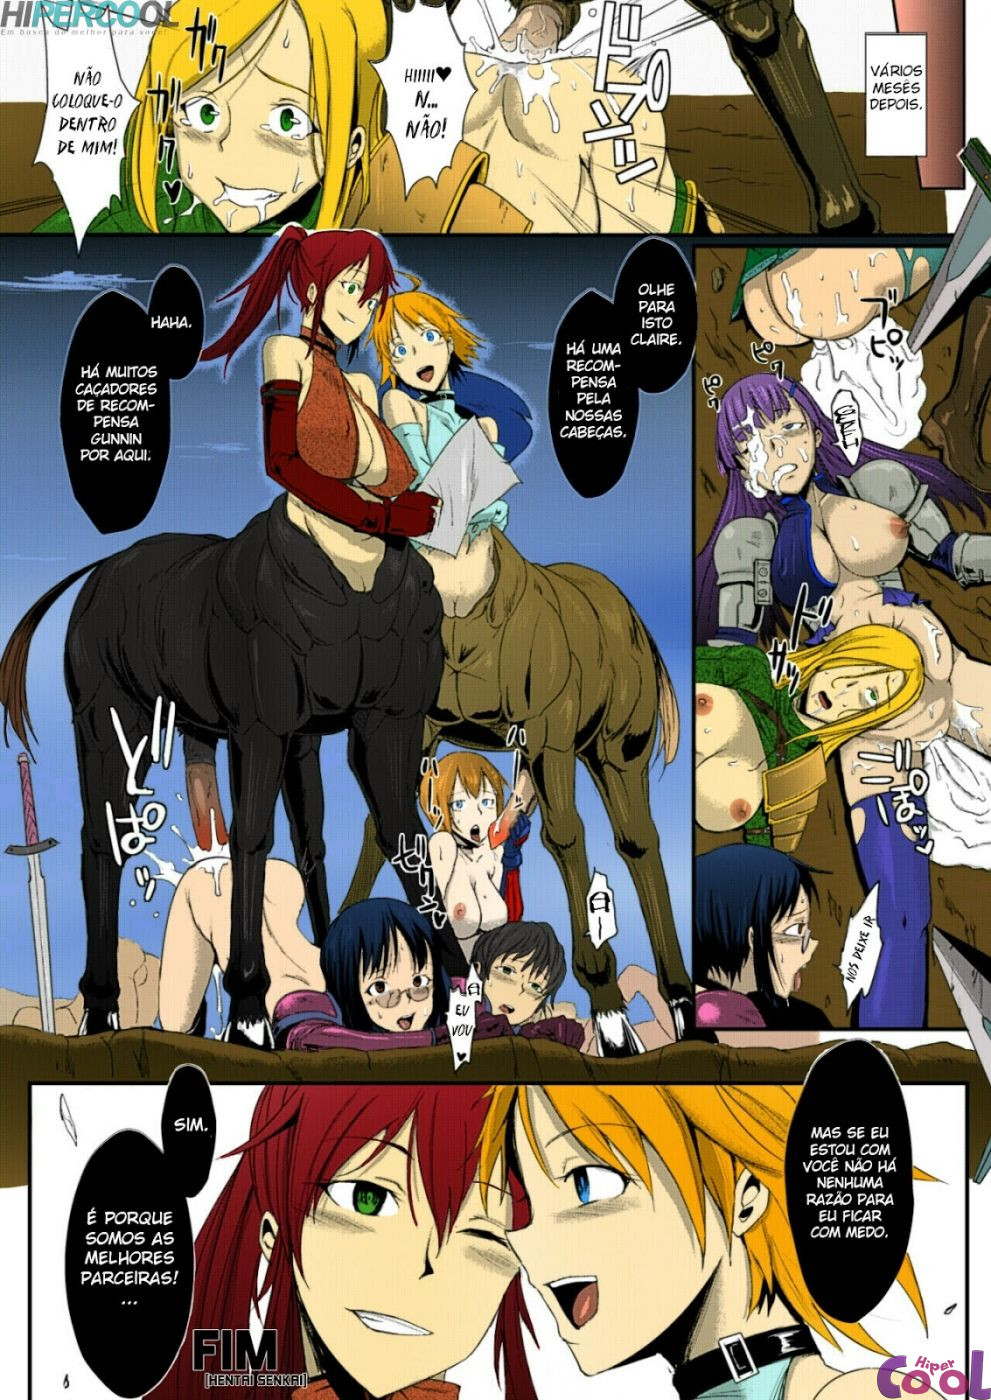 man-eater-colorido-chapter-01-page-16.jpg